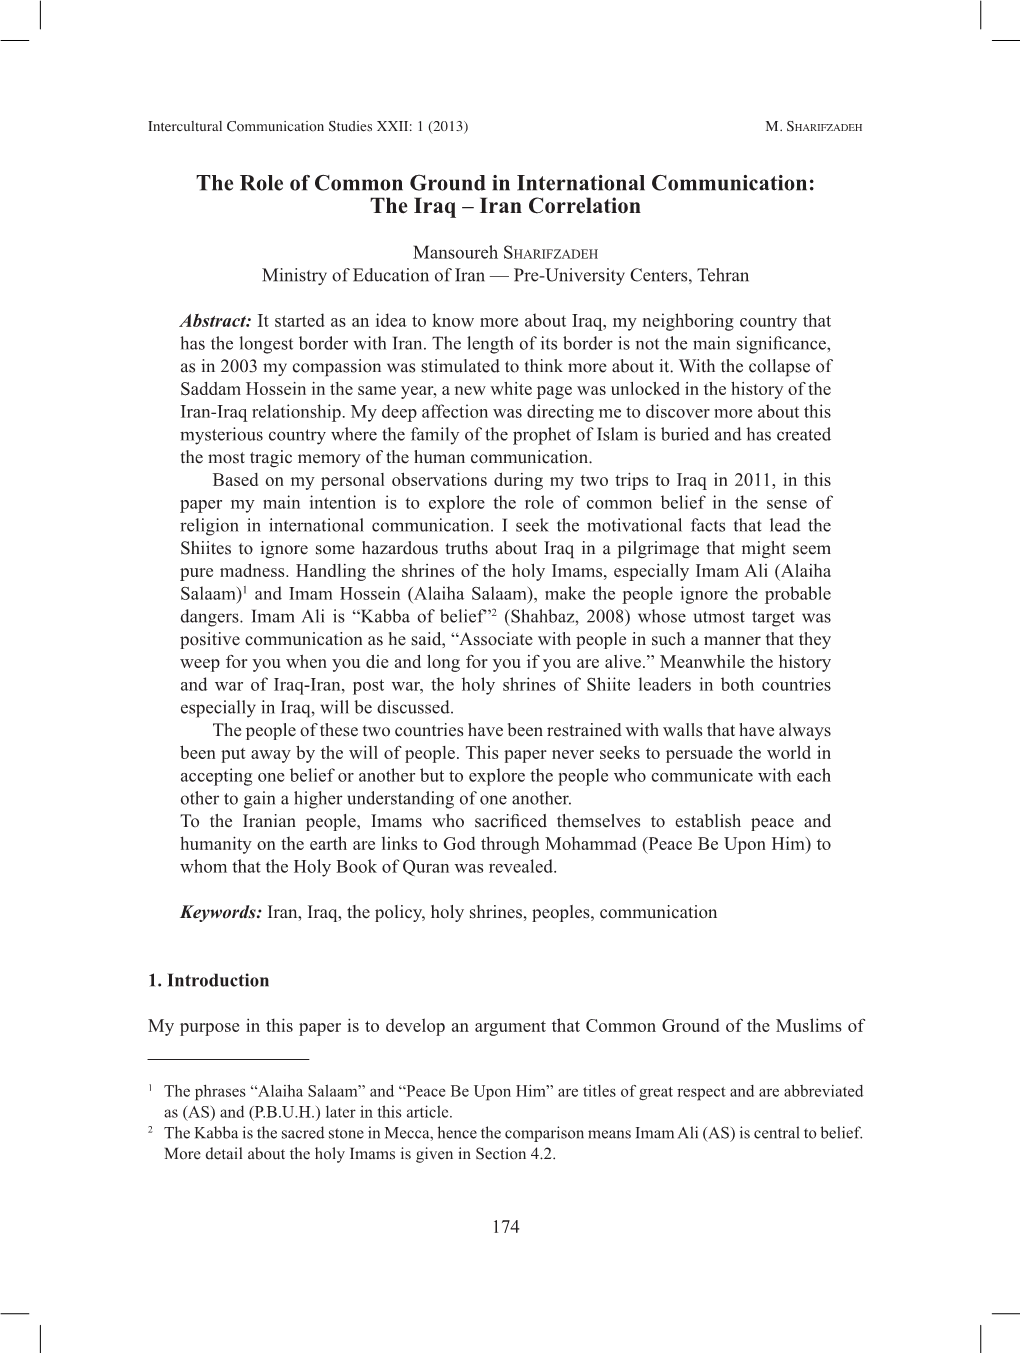 The Role of Common Ground in International Communication: the Iraq – Iran Correlation